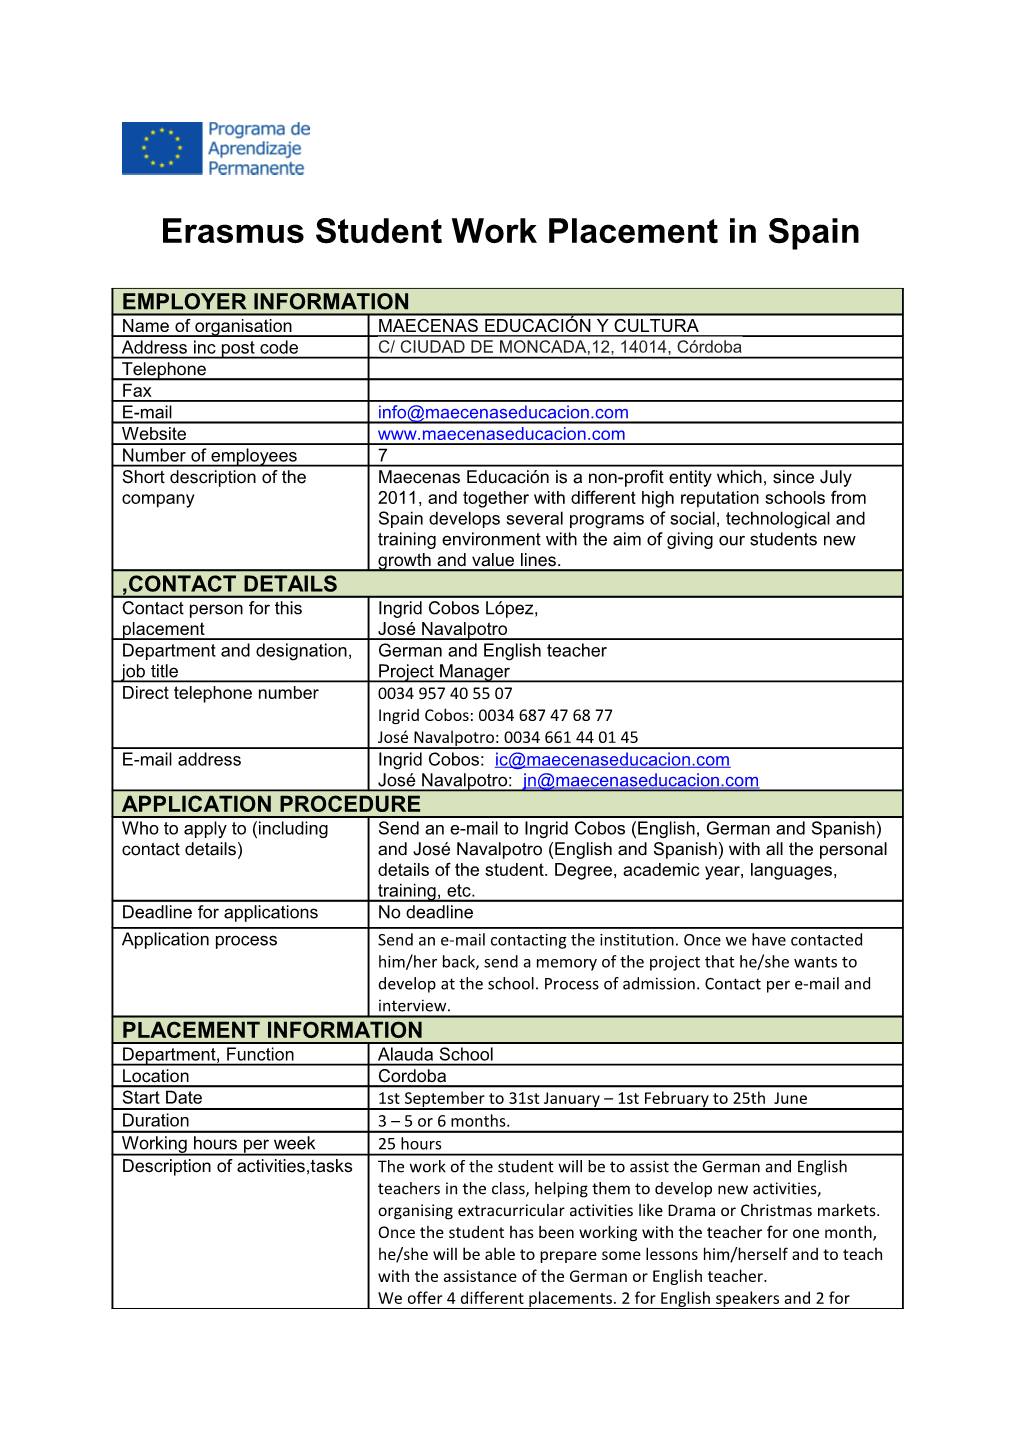 Erasmus Student Work Placement in the UK s2